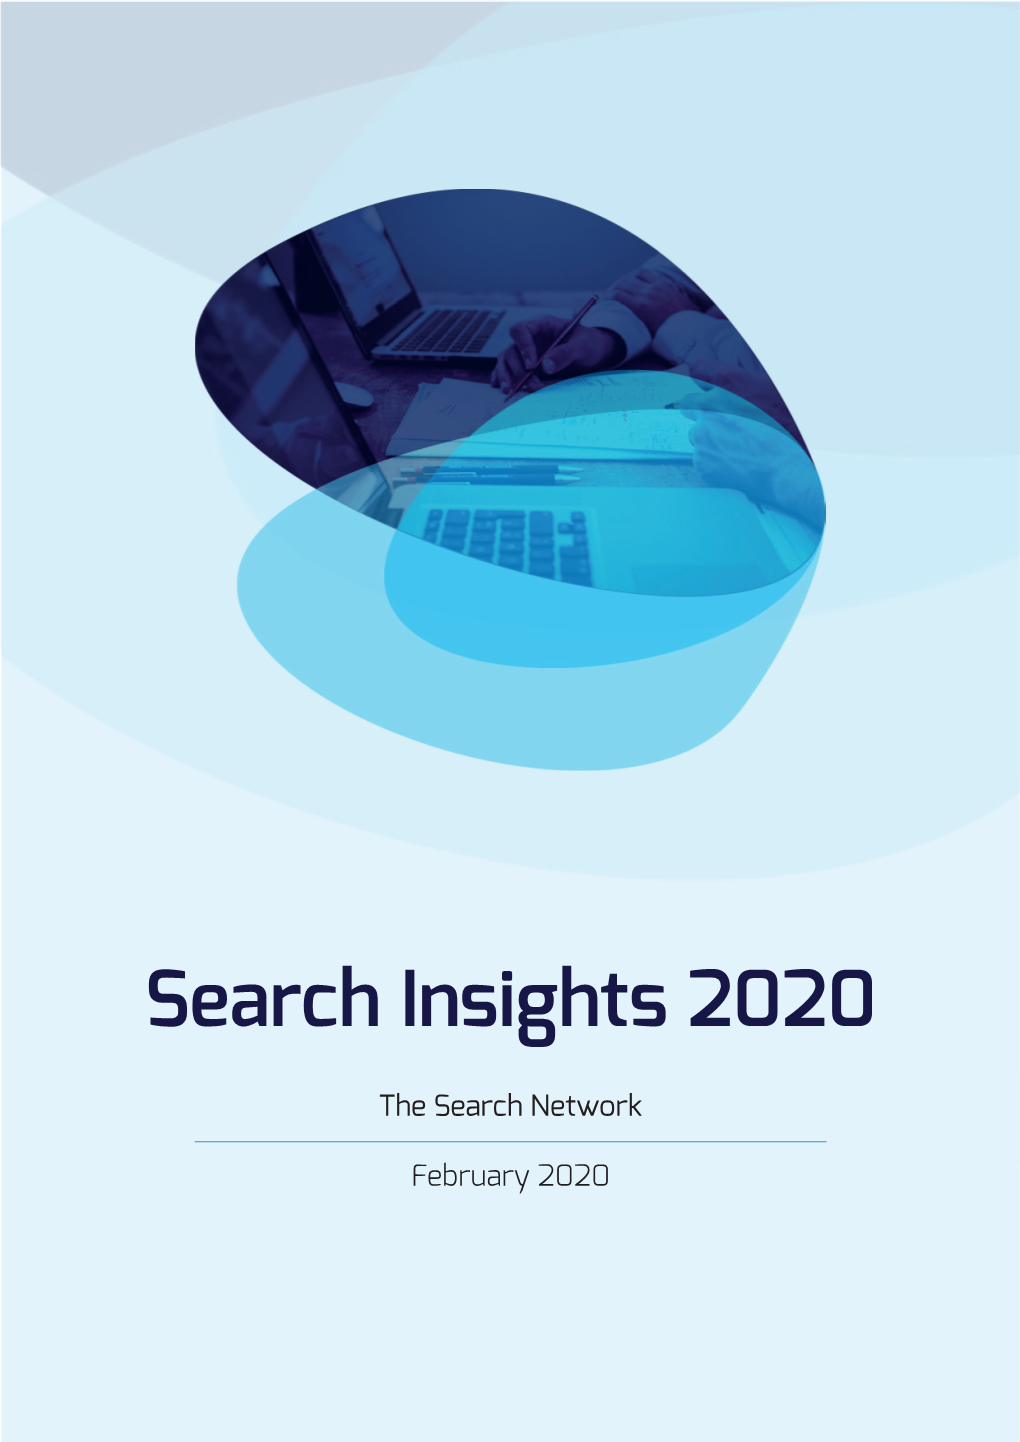 Search Insights 2020